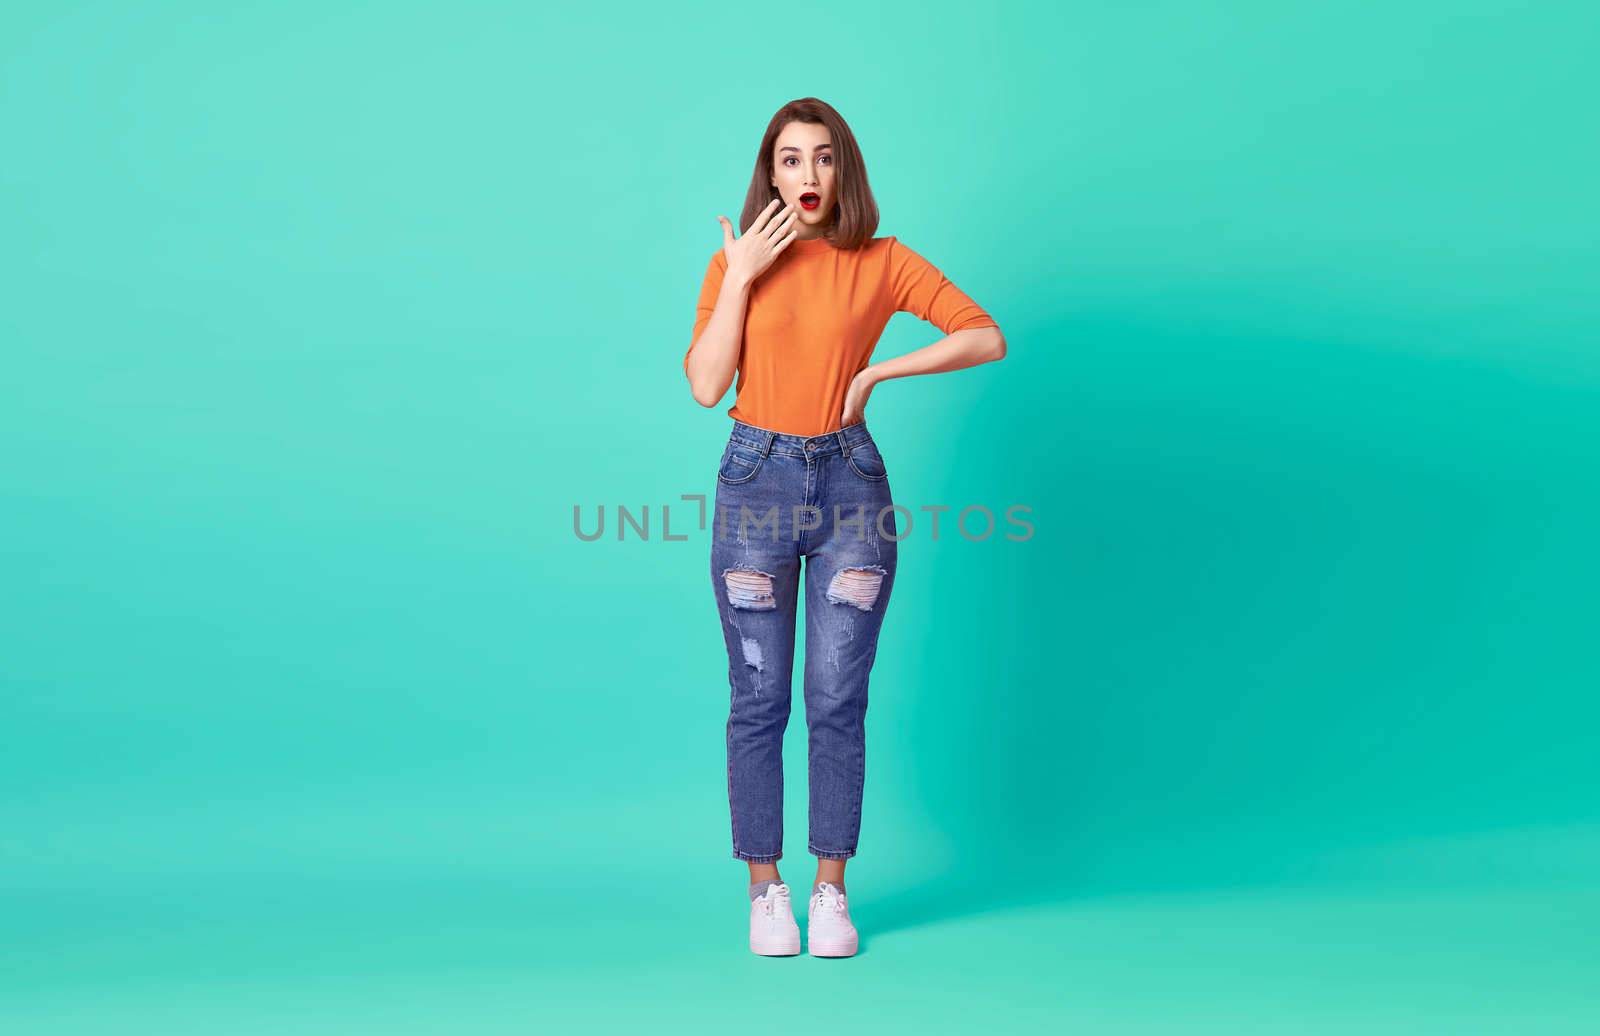 Shocked excited beautiful woman with mouth open wearing casual orange t-shirt over blue background.